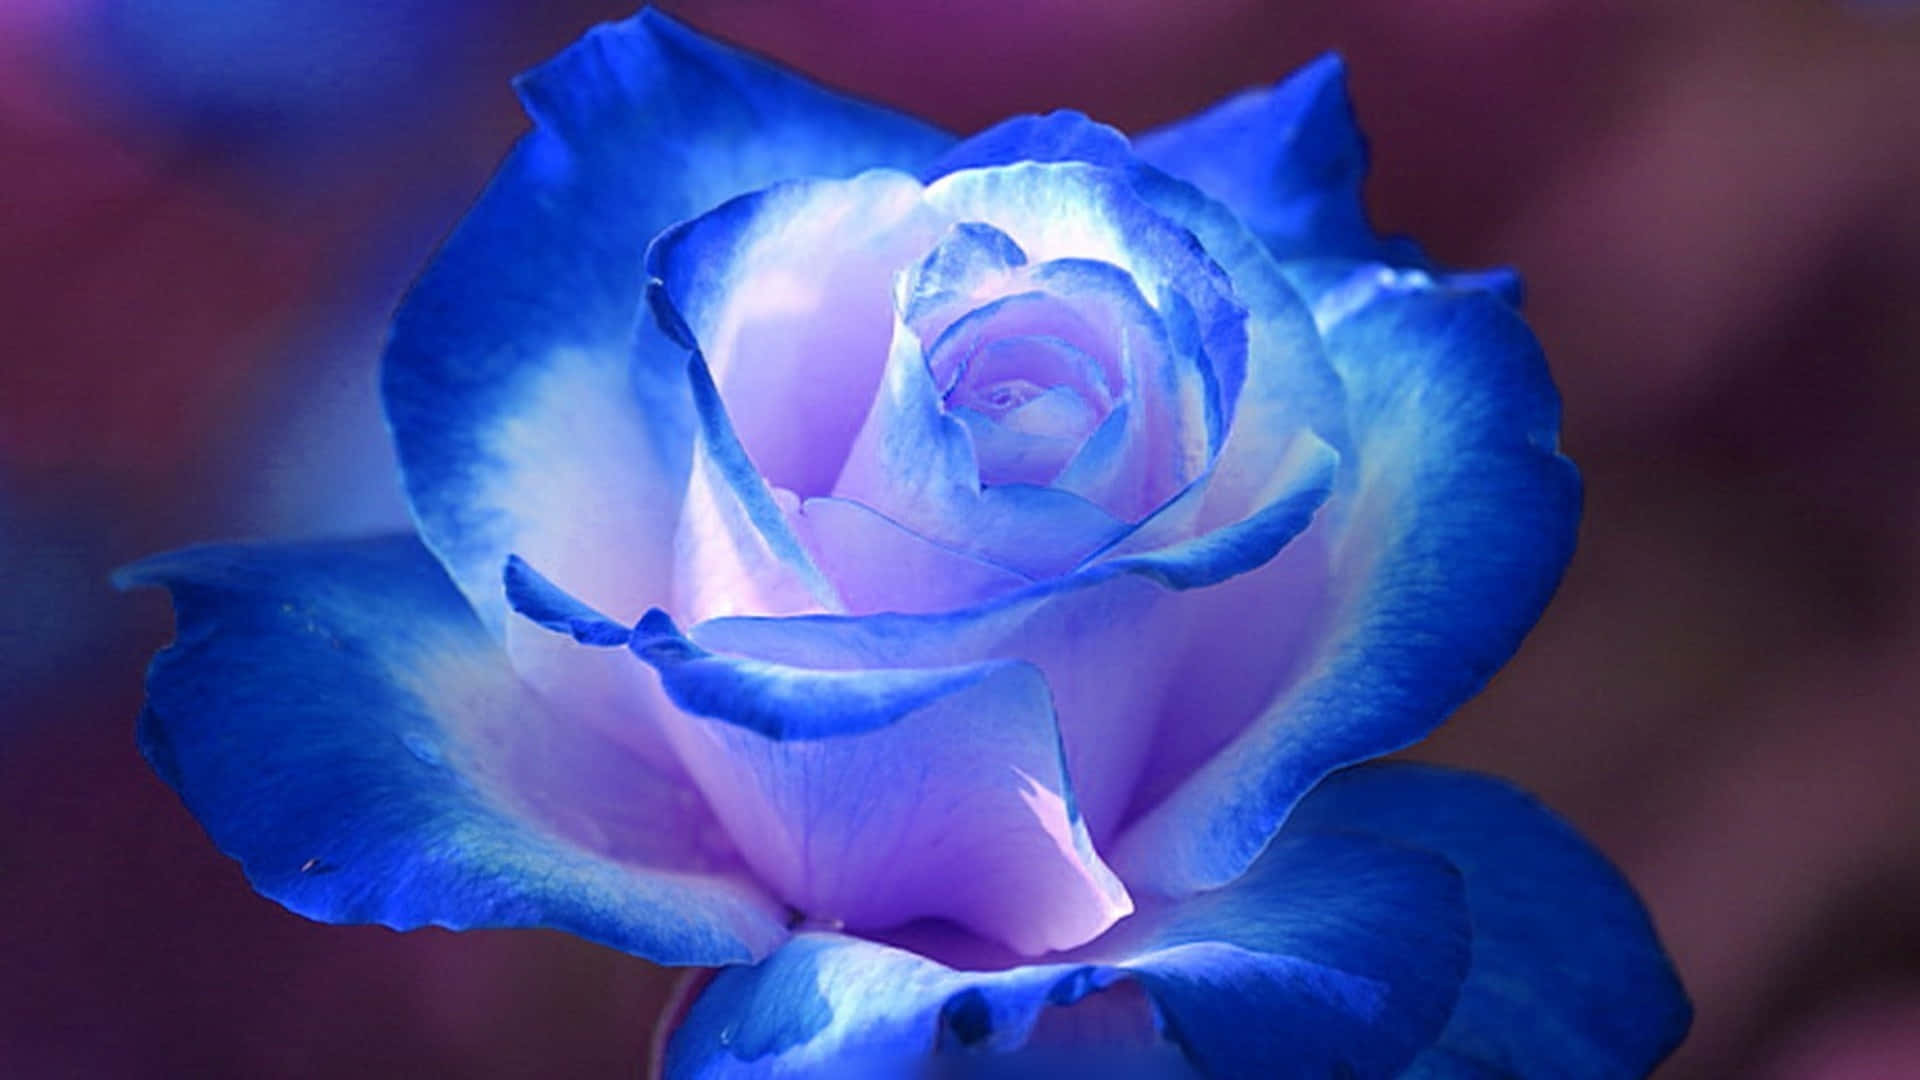 A Magnificent and Beautiful Rose